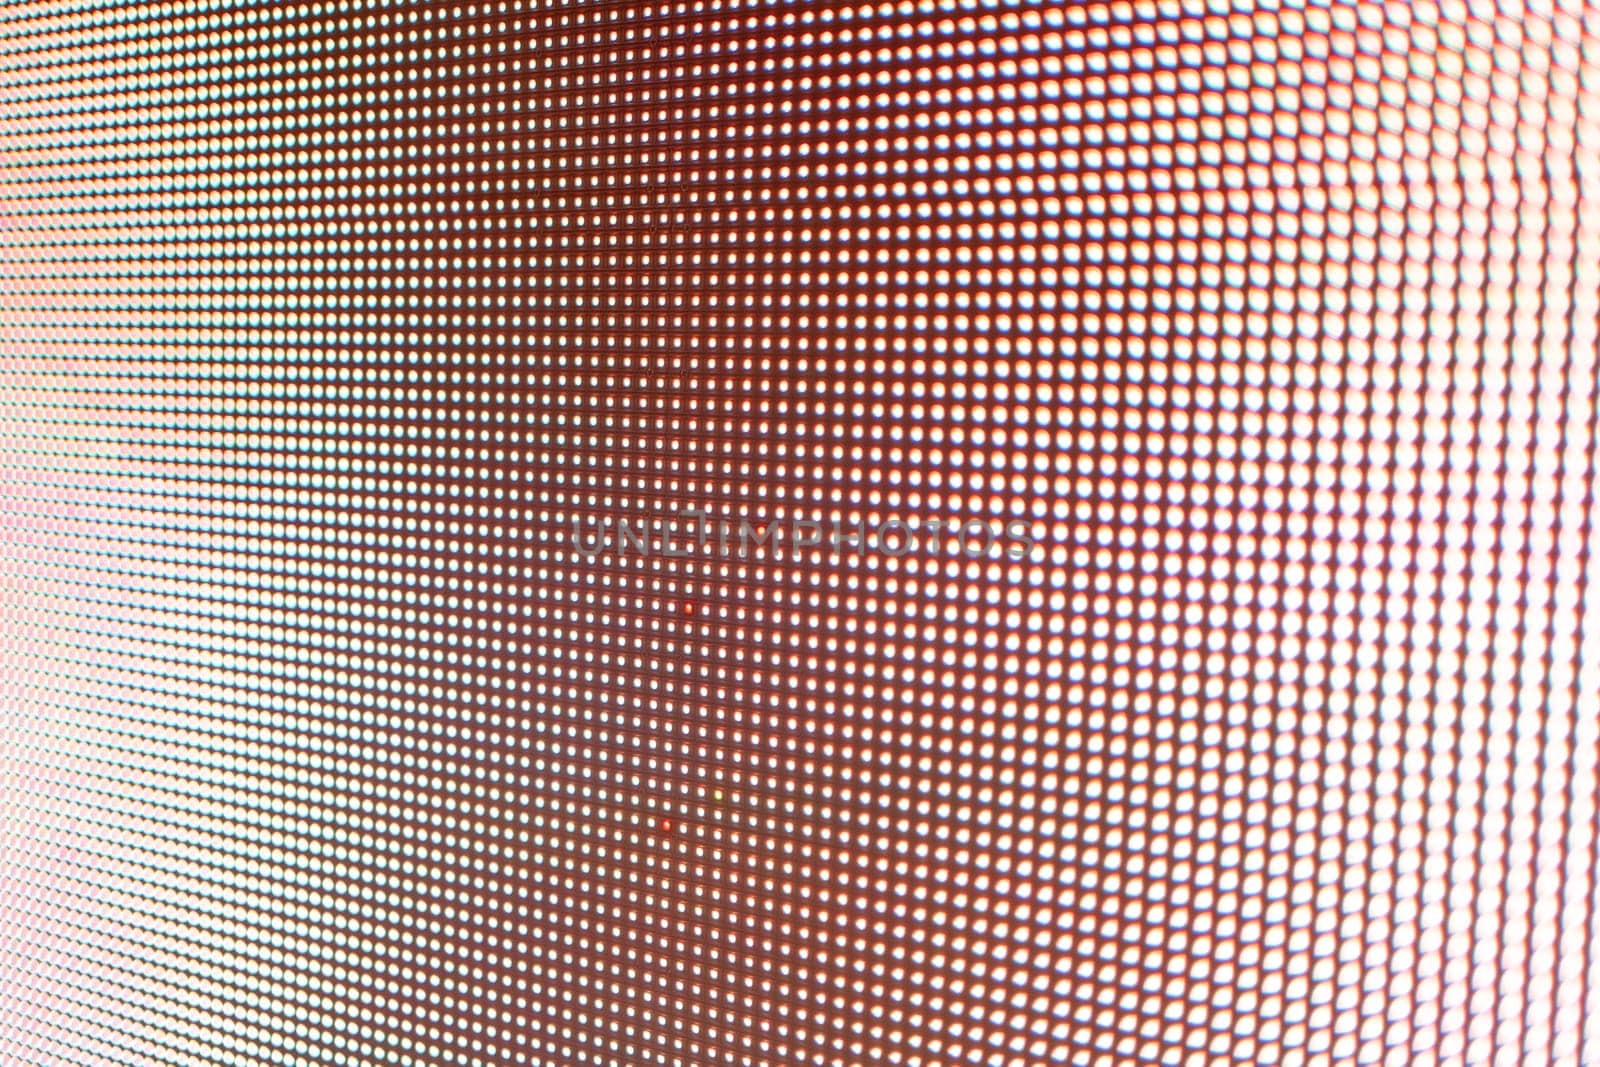 Abstract light gradient texture displayed on an LED screen with red color palette, creating visually dynamic abstract background texture.